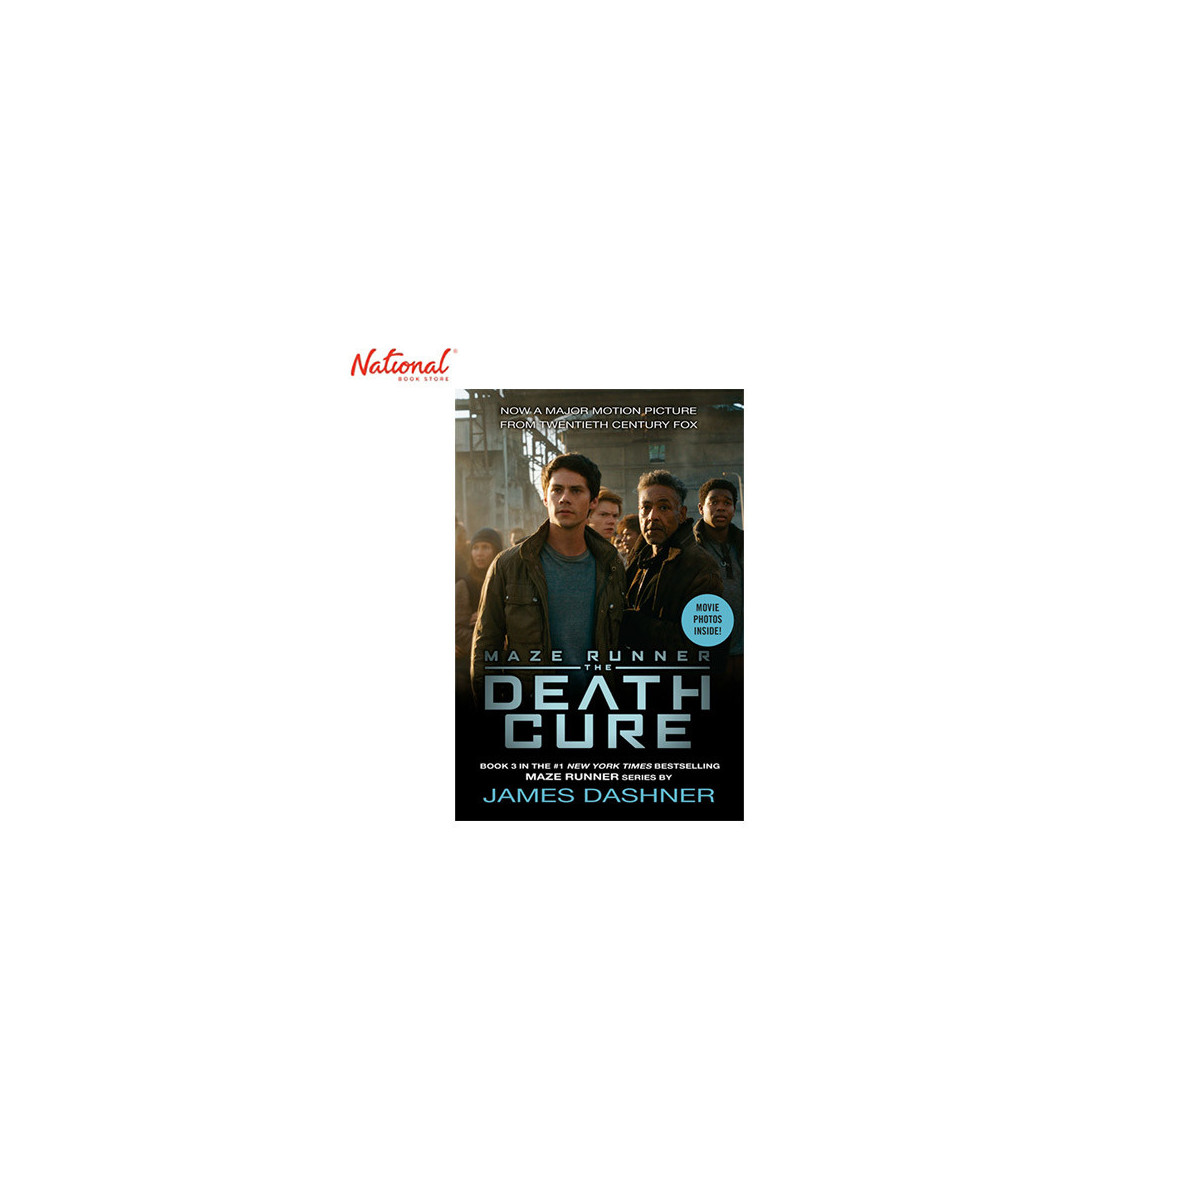 MMAZE RUNNER3 THE DEATH CURE MTI